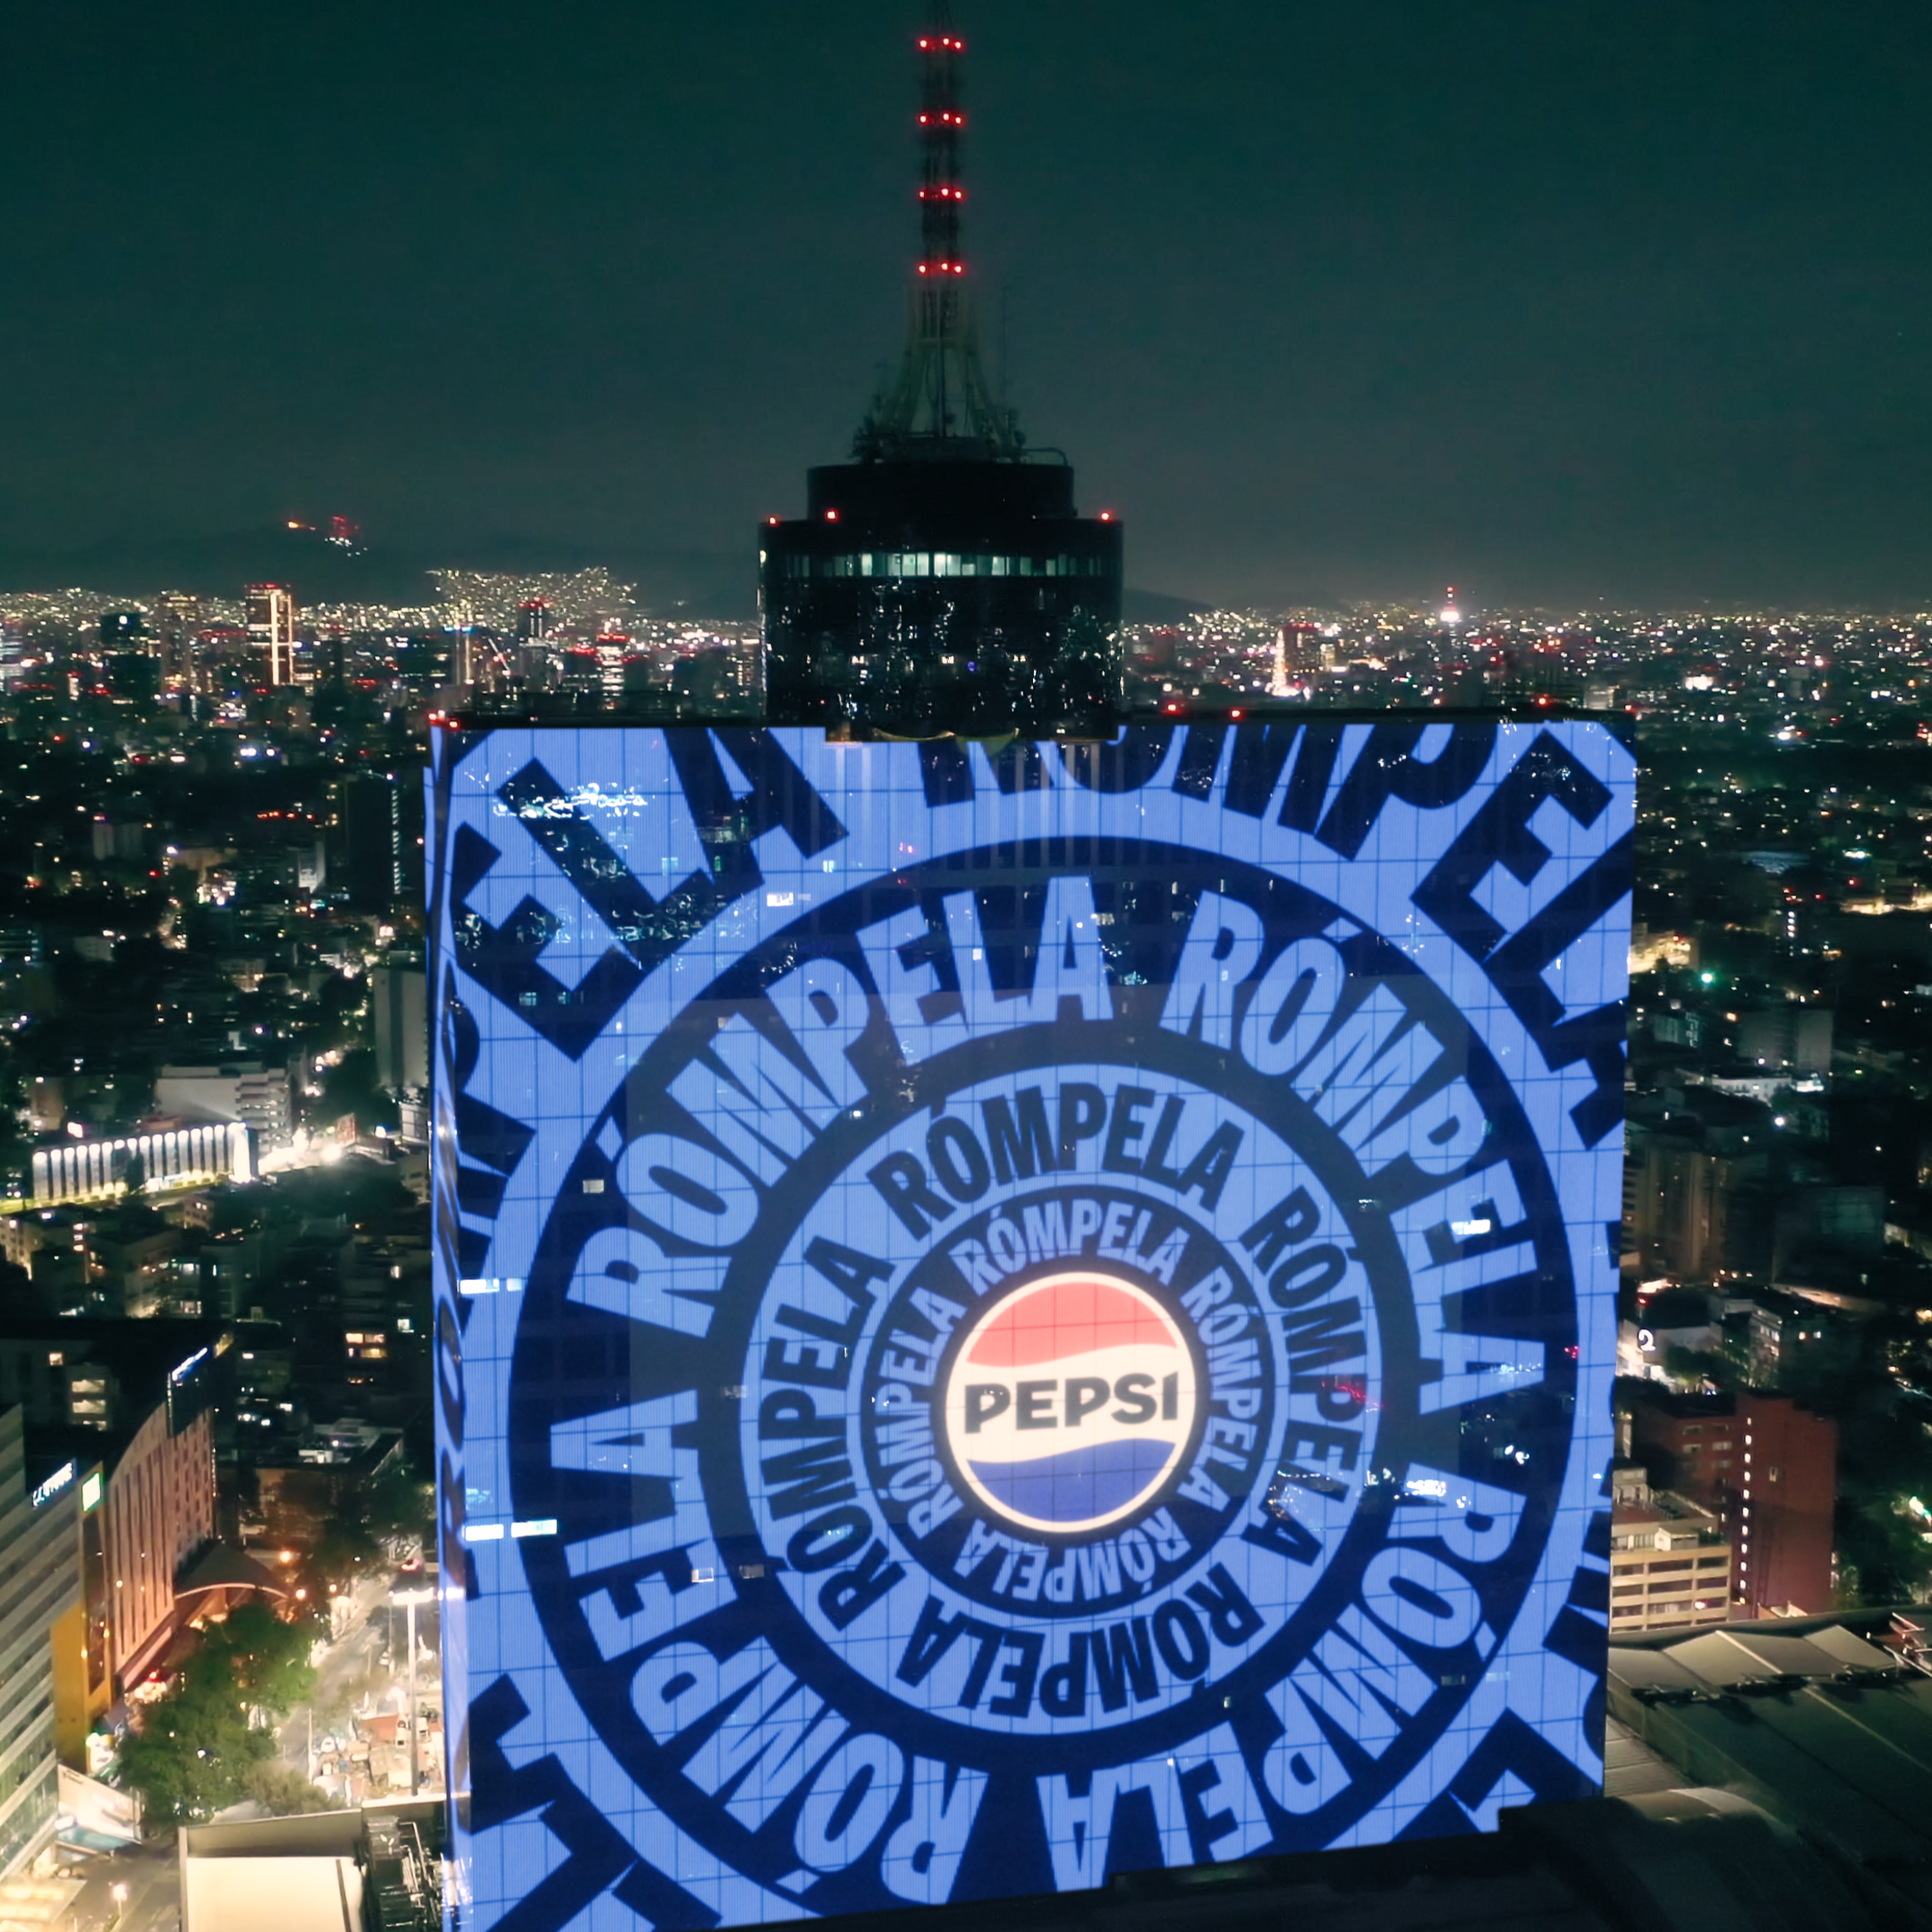 Billboard with Pepsi logo and repeated text &quot;ROMPELA&quot; in cityscape at night